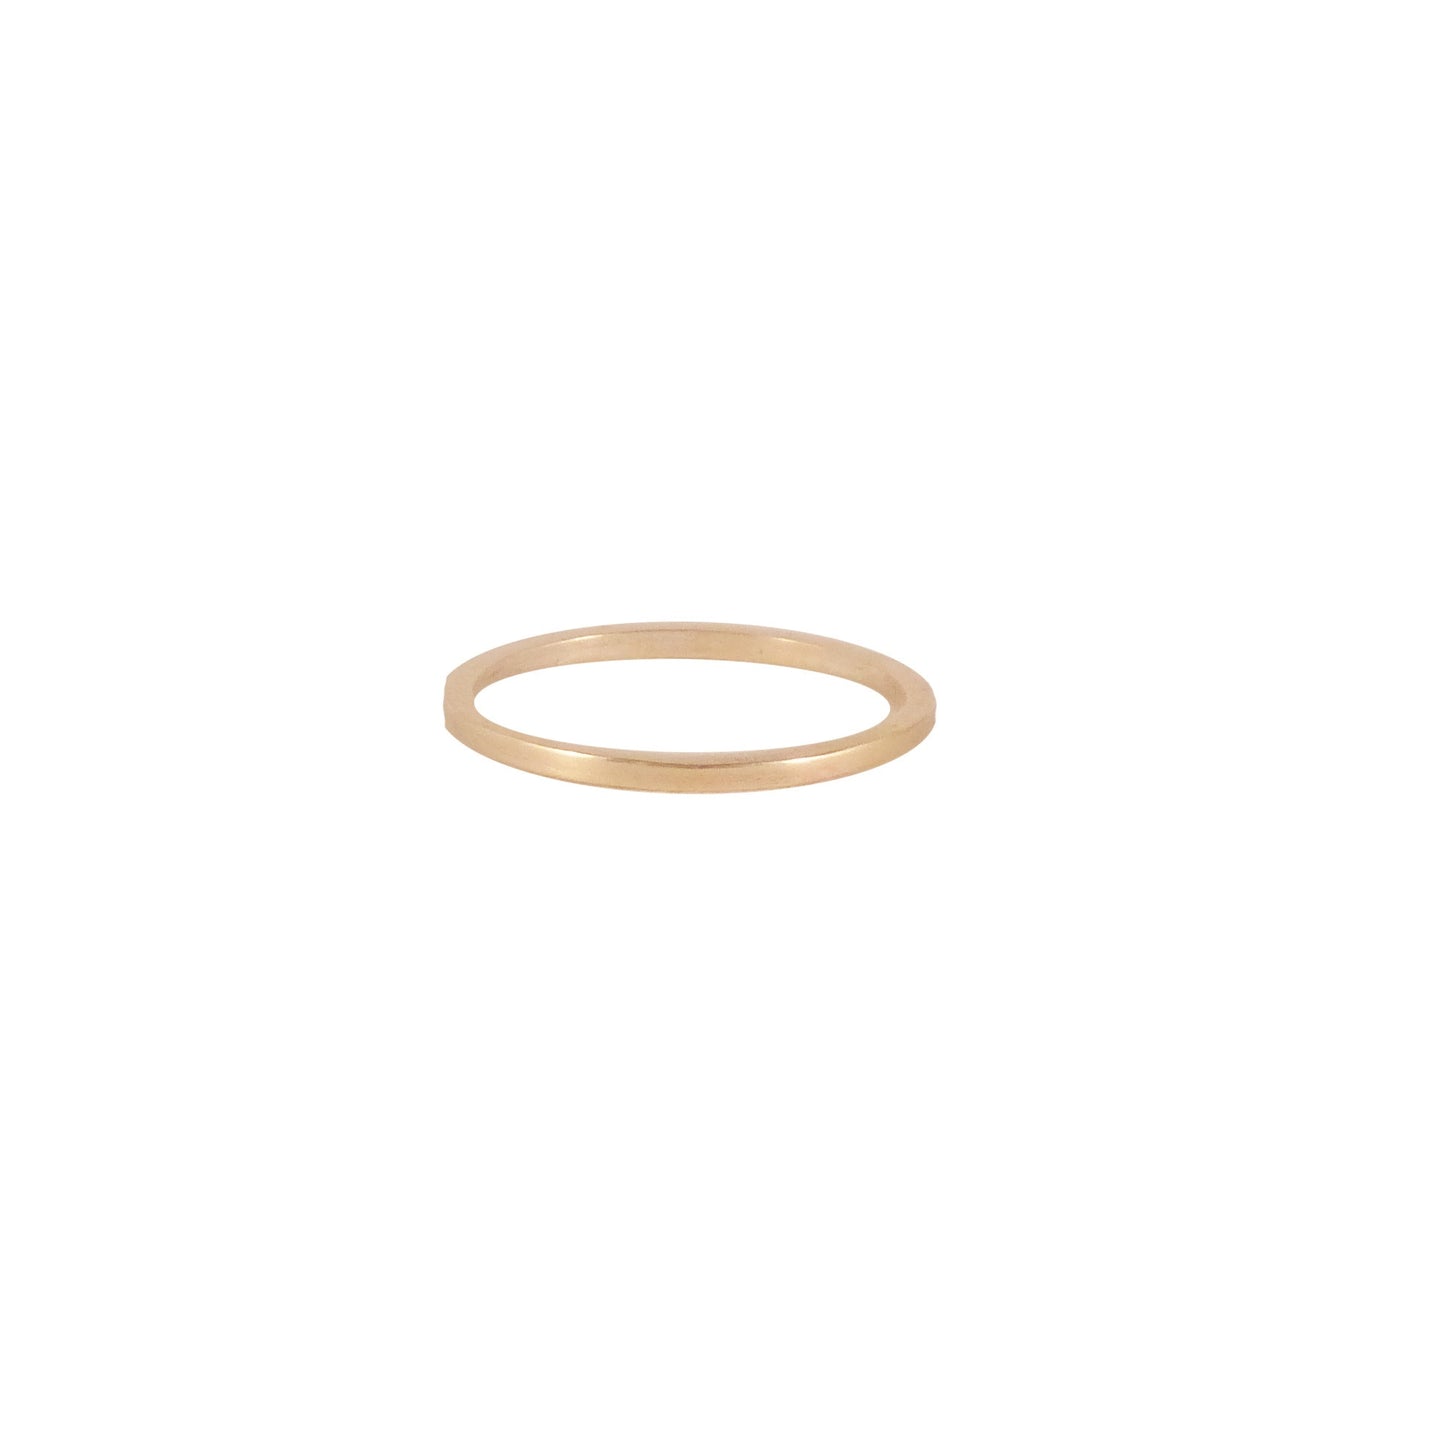 Skinny square band ring - 9ct yellow gold